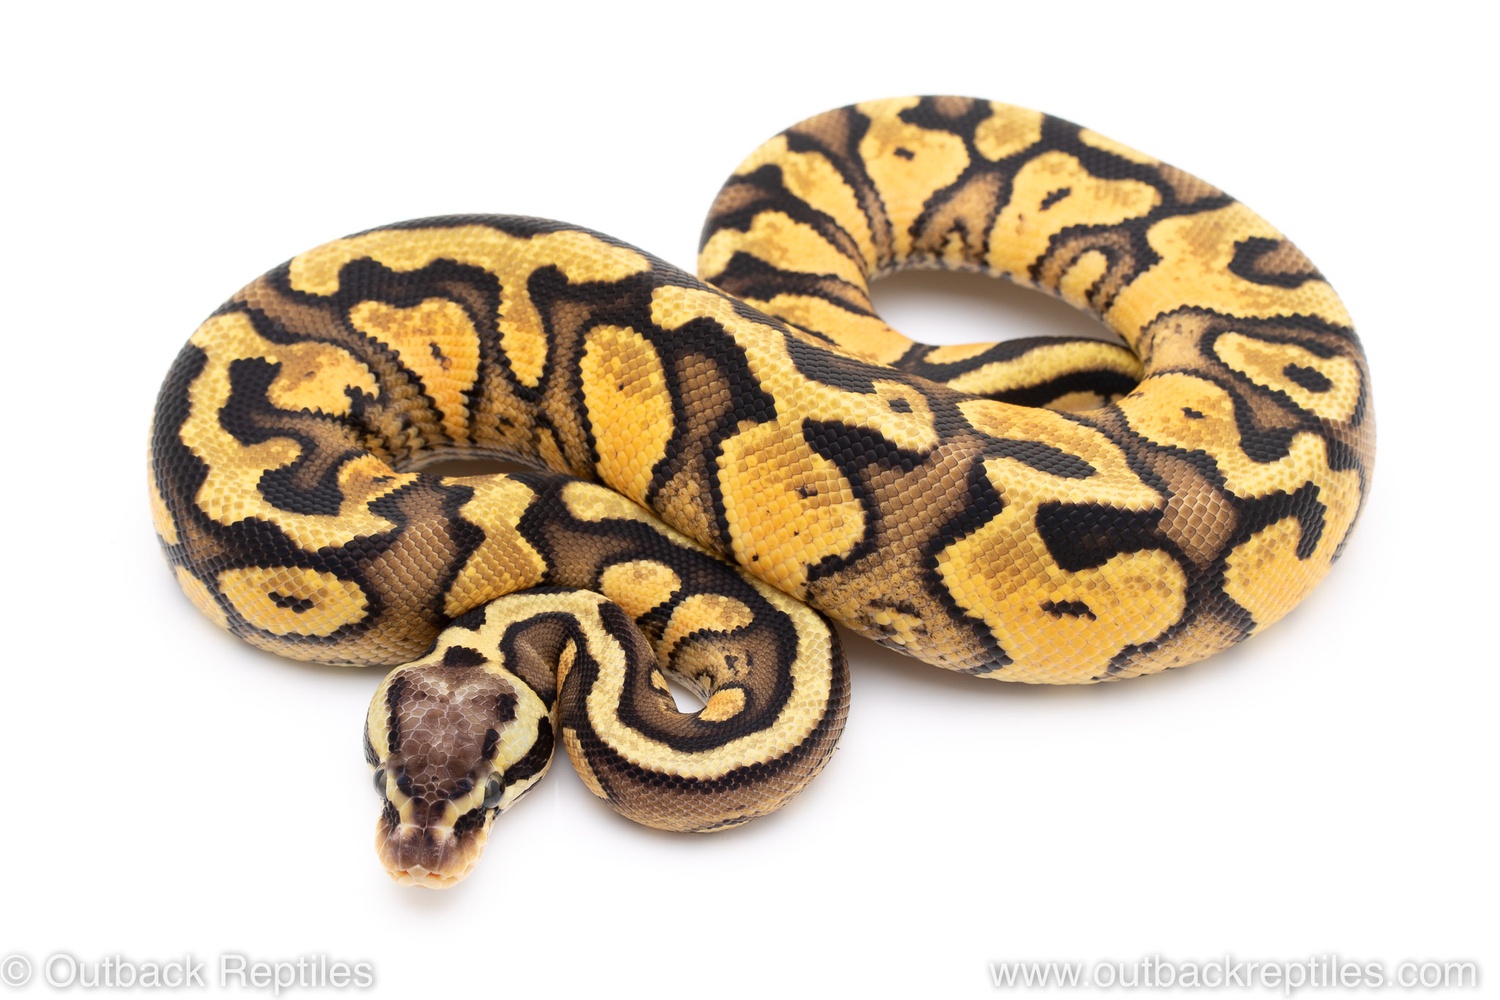 Pastel YB Red Stripe Ball Python by Outback Reptiles